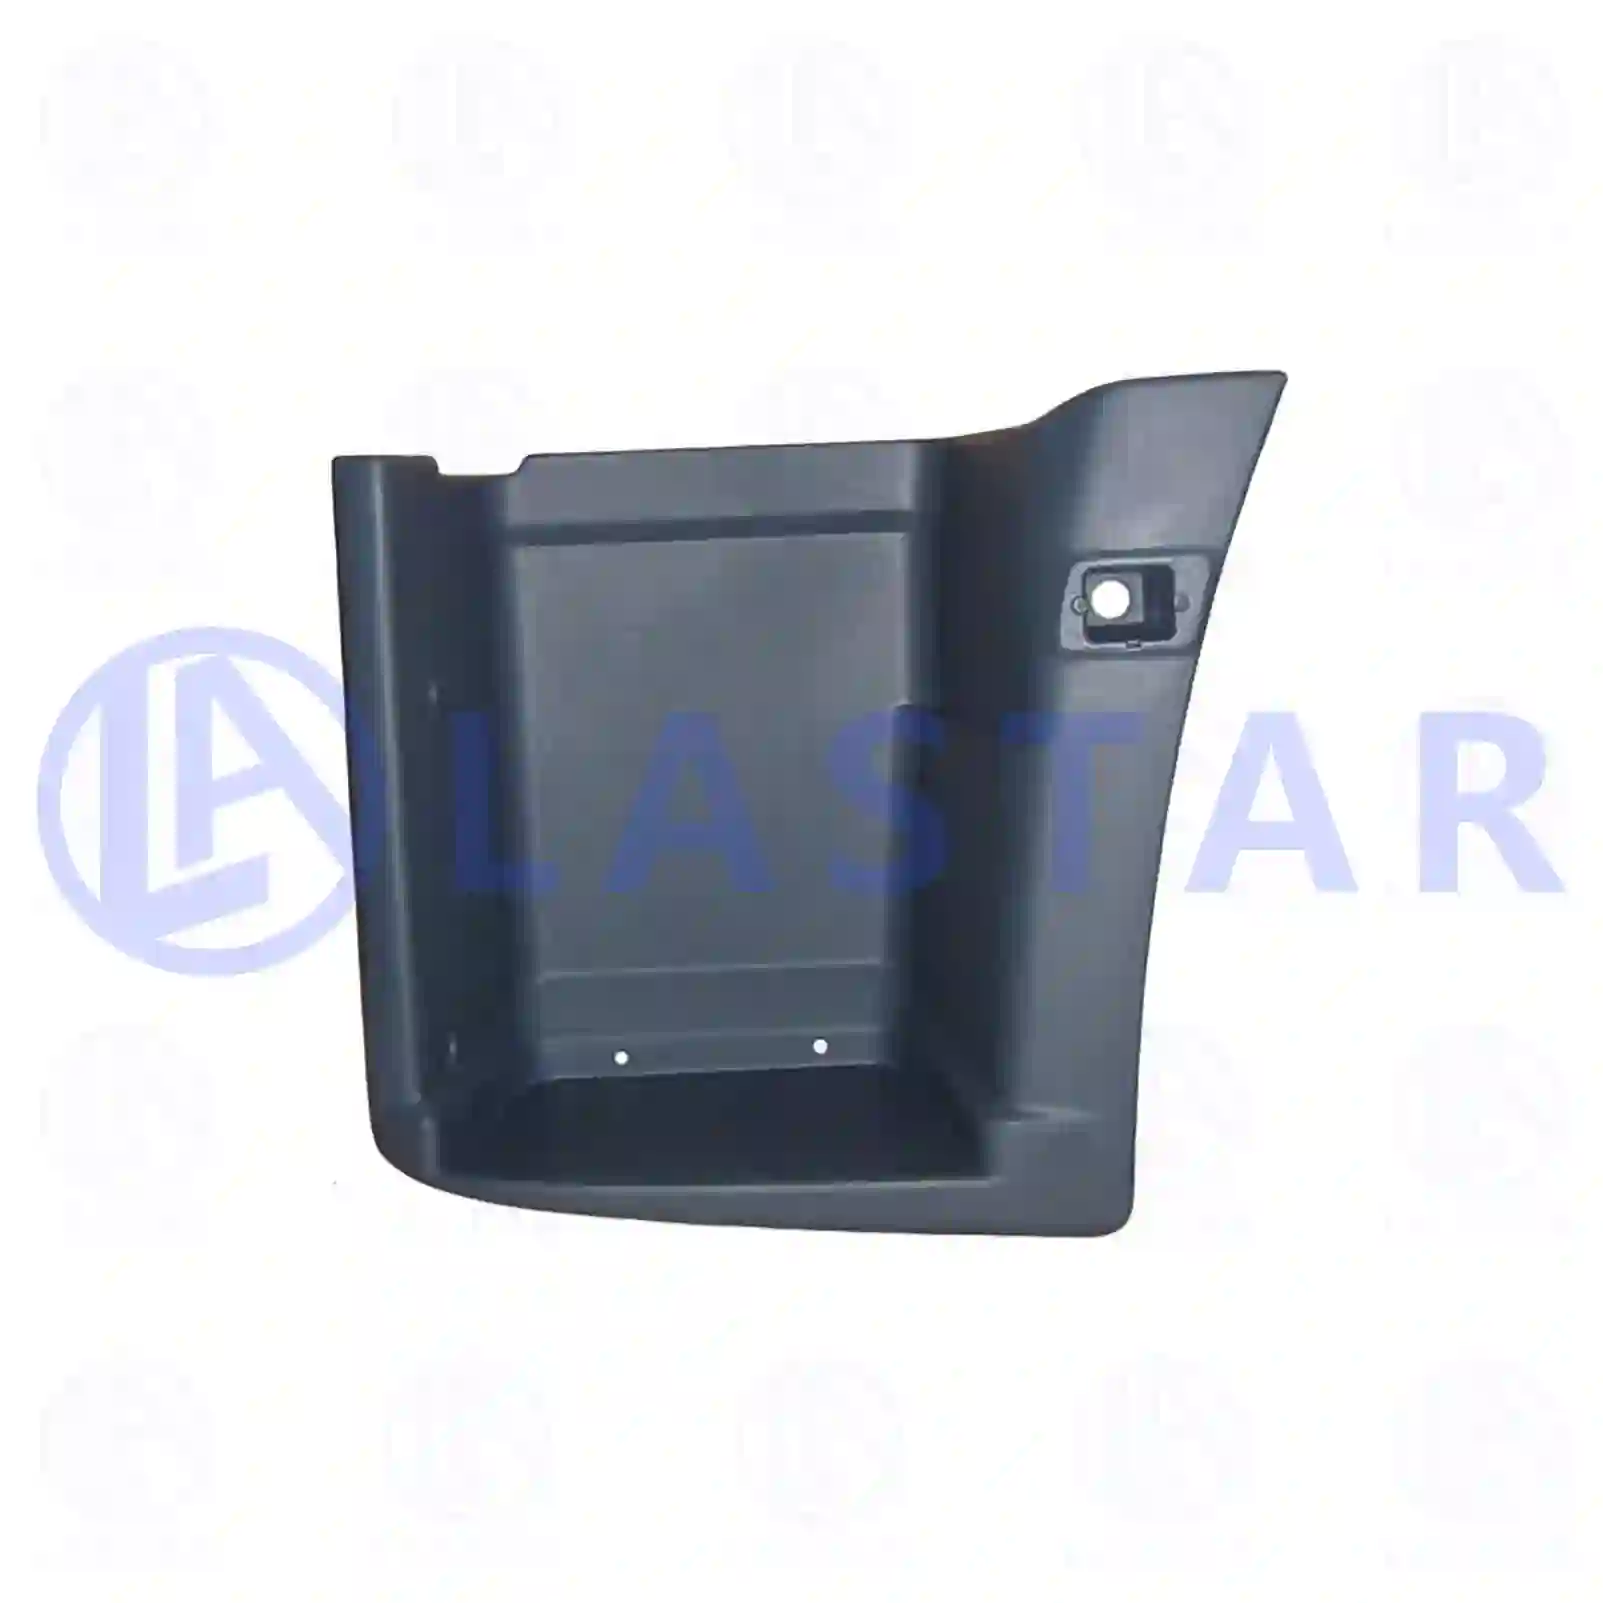 Step well case, left, 77719881, 02997317, 2997317, 98417358, 99805622, ZG61198-0008 ||  77719881 Lastar Spare Part | Truck Spare Parts, Auotomotive Spare Parts Step well case, left, 77719881, 02997317, 2997317, 98417358, 99805622, ZG61198-0008 ||  77719881 Lastar Spare Part | Truck Spare Parts, Auotomotive Spare Parts